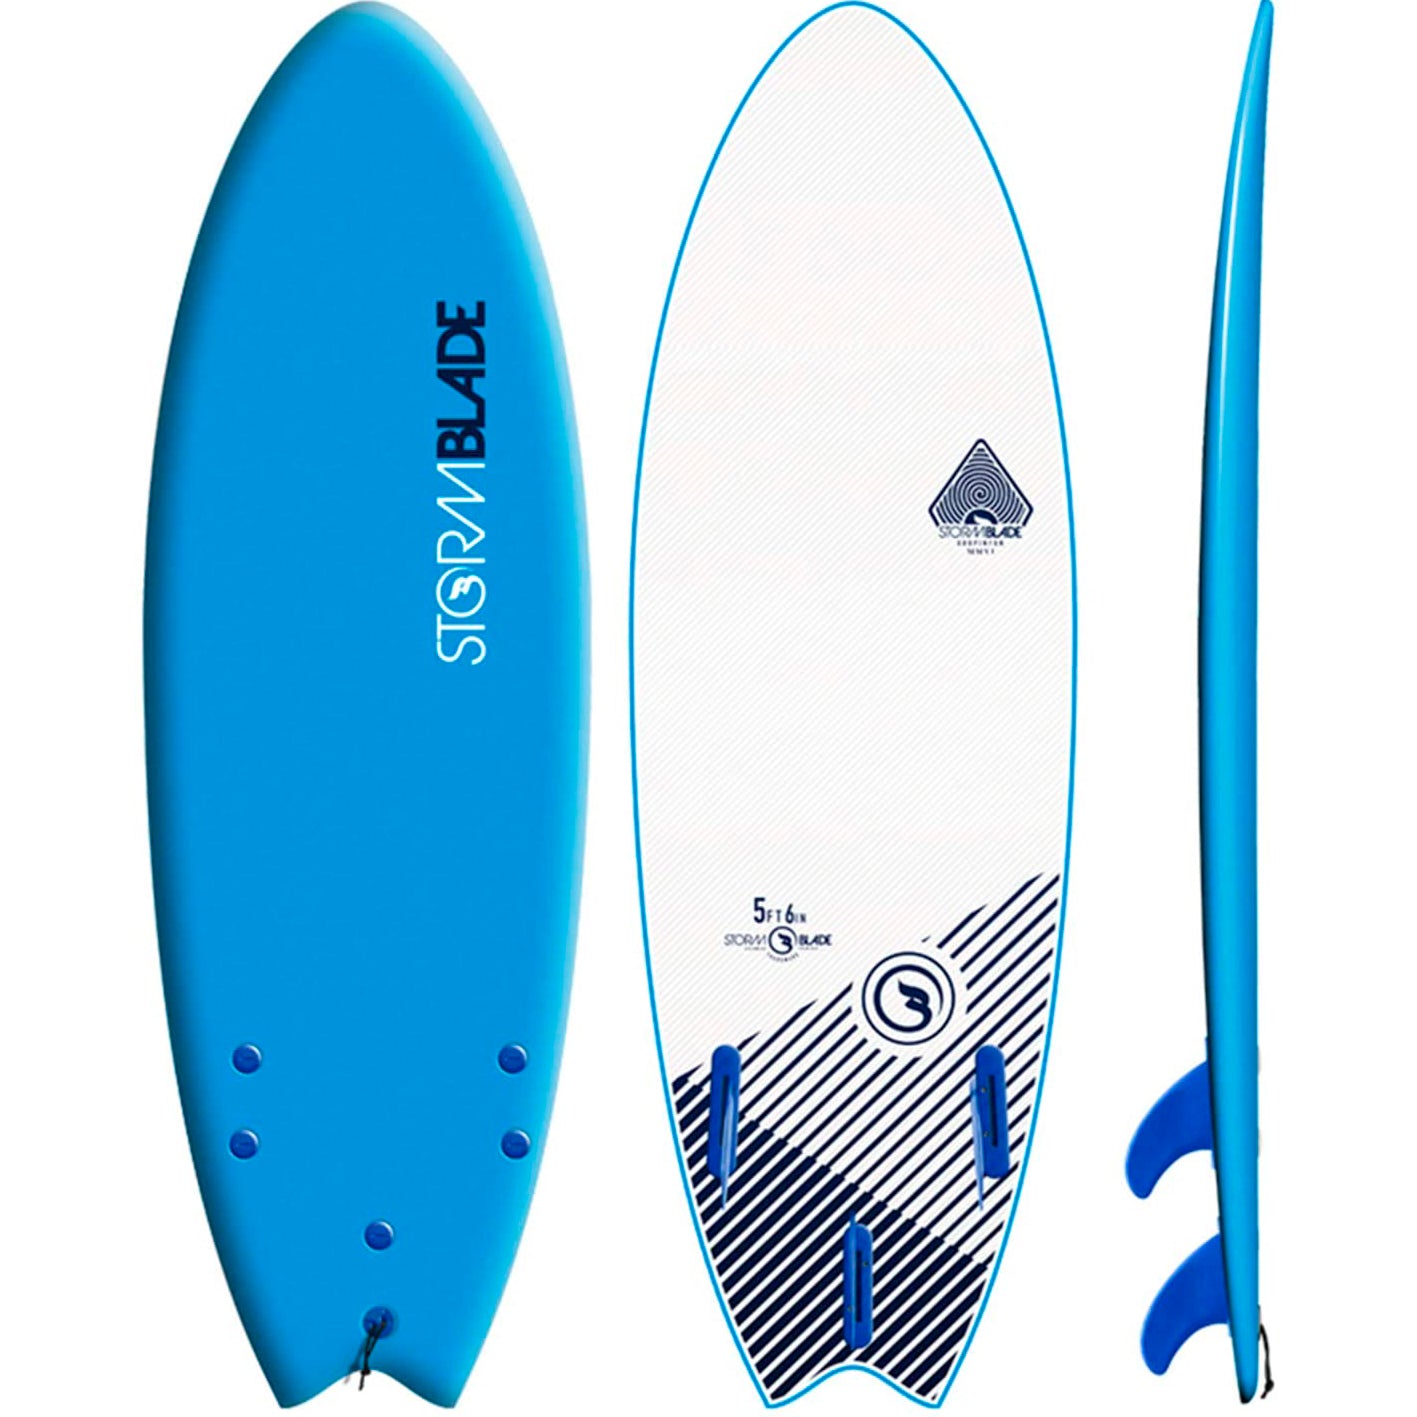 Storm Blade Swallow Tail Surfboard Azure Blue 6ft0in